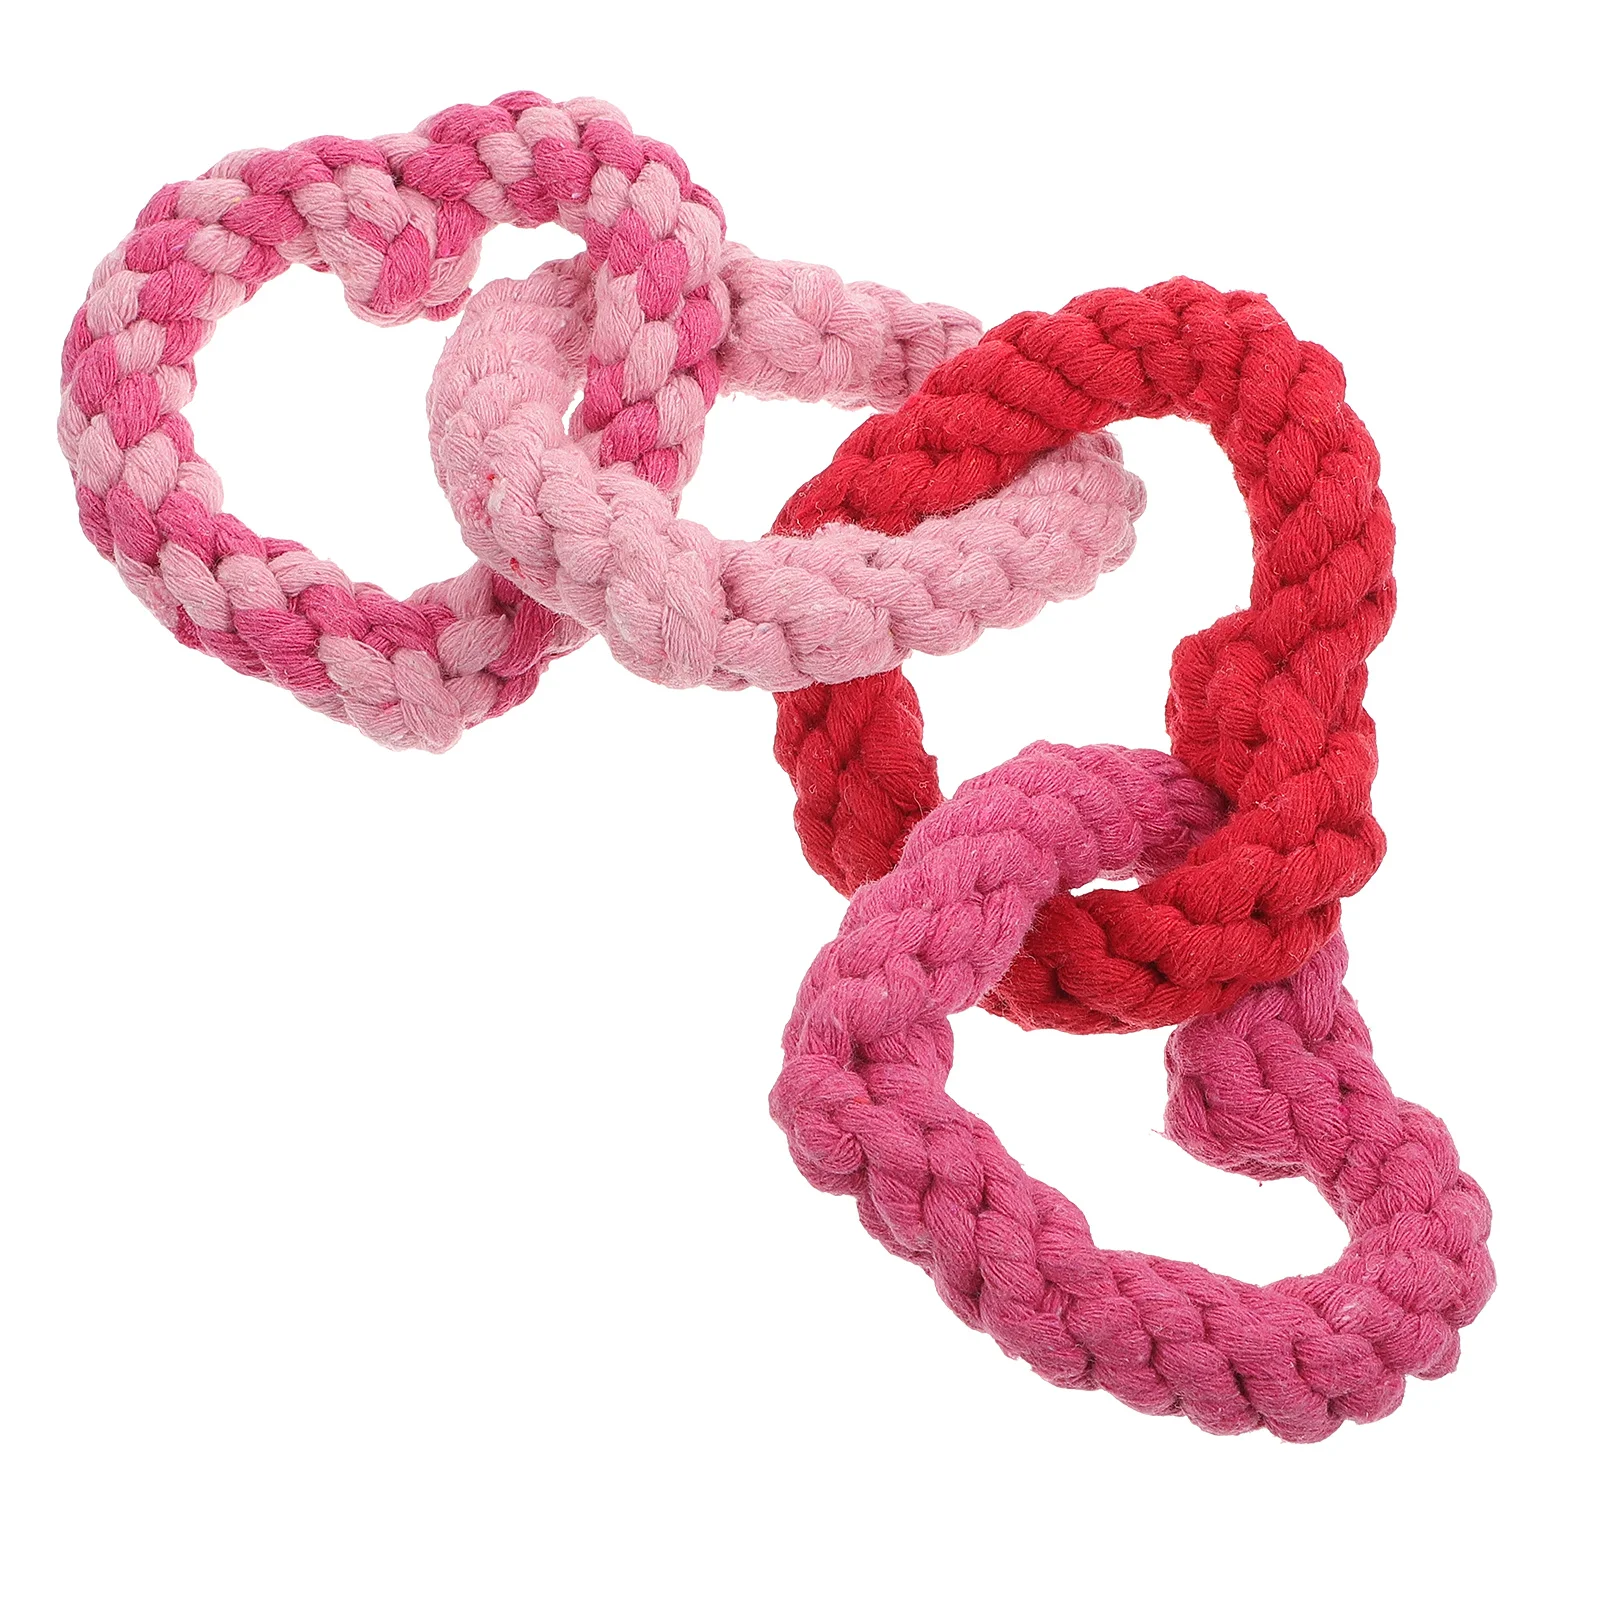 

Toys Dog Toy Chew Puppy Pet Rope Chewing Cat Teething Molar Heart Interactive Cotton Bite Kongropes Candy Valentines Pets Wartug